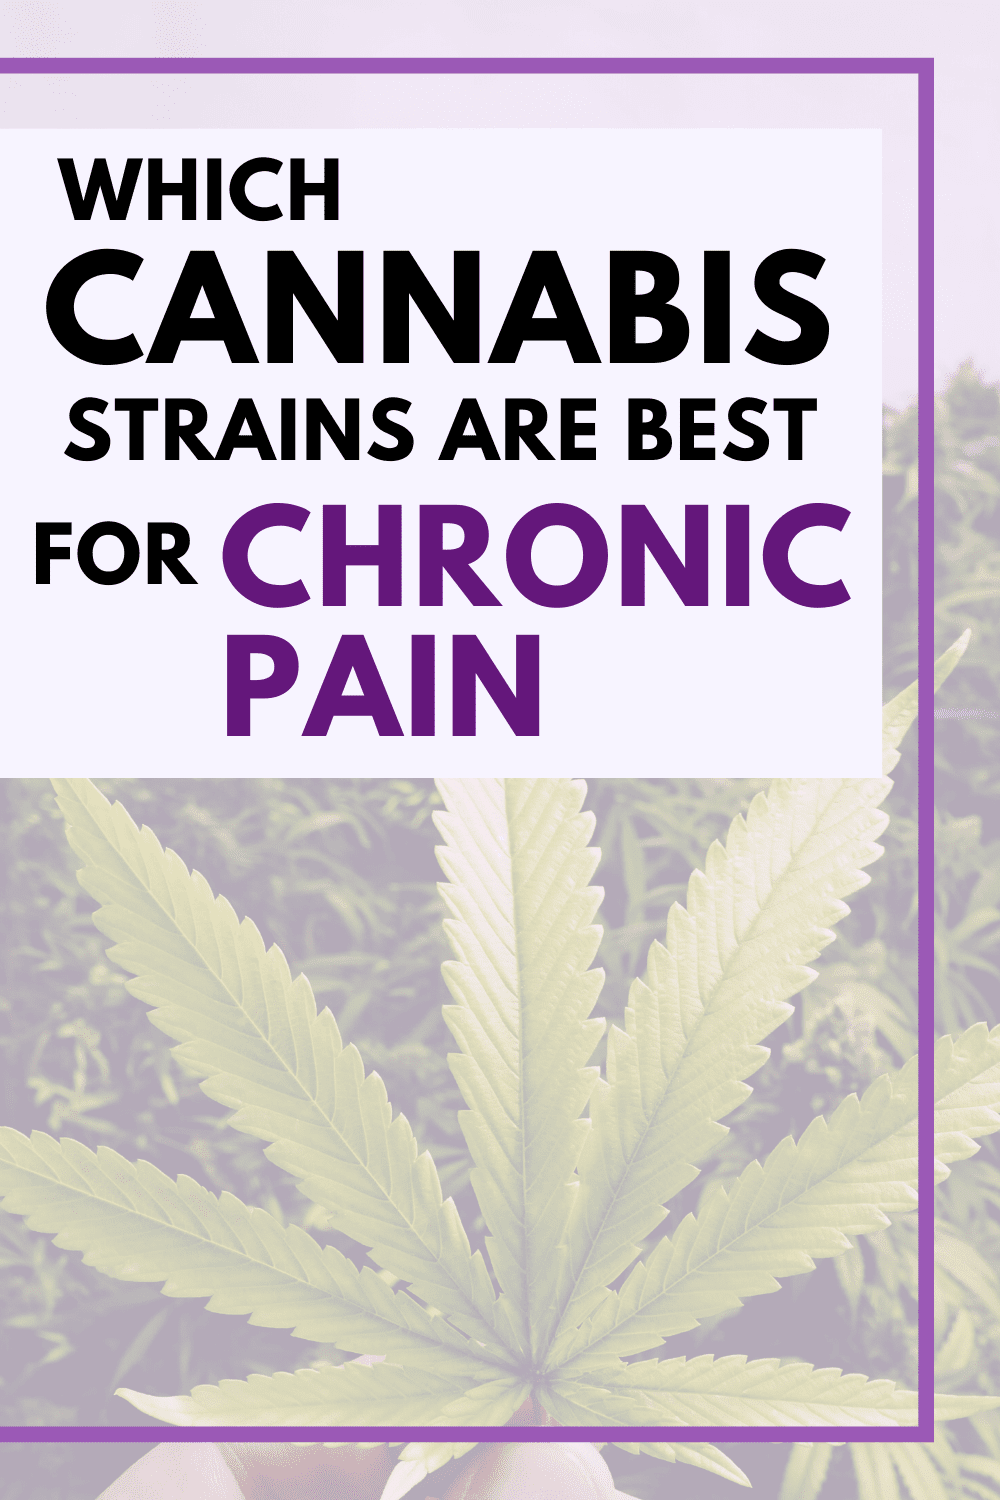 indica weed strains can help reduce pain